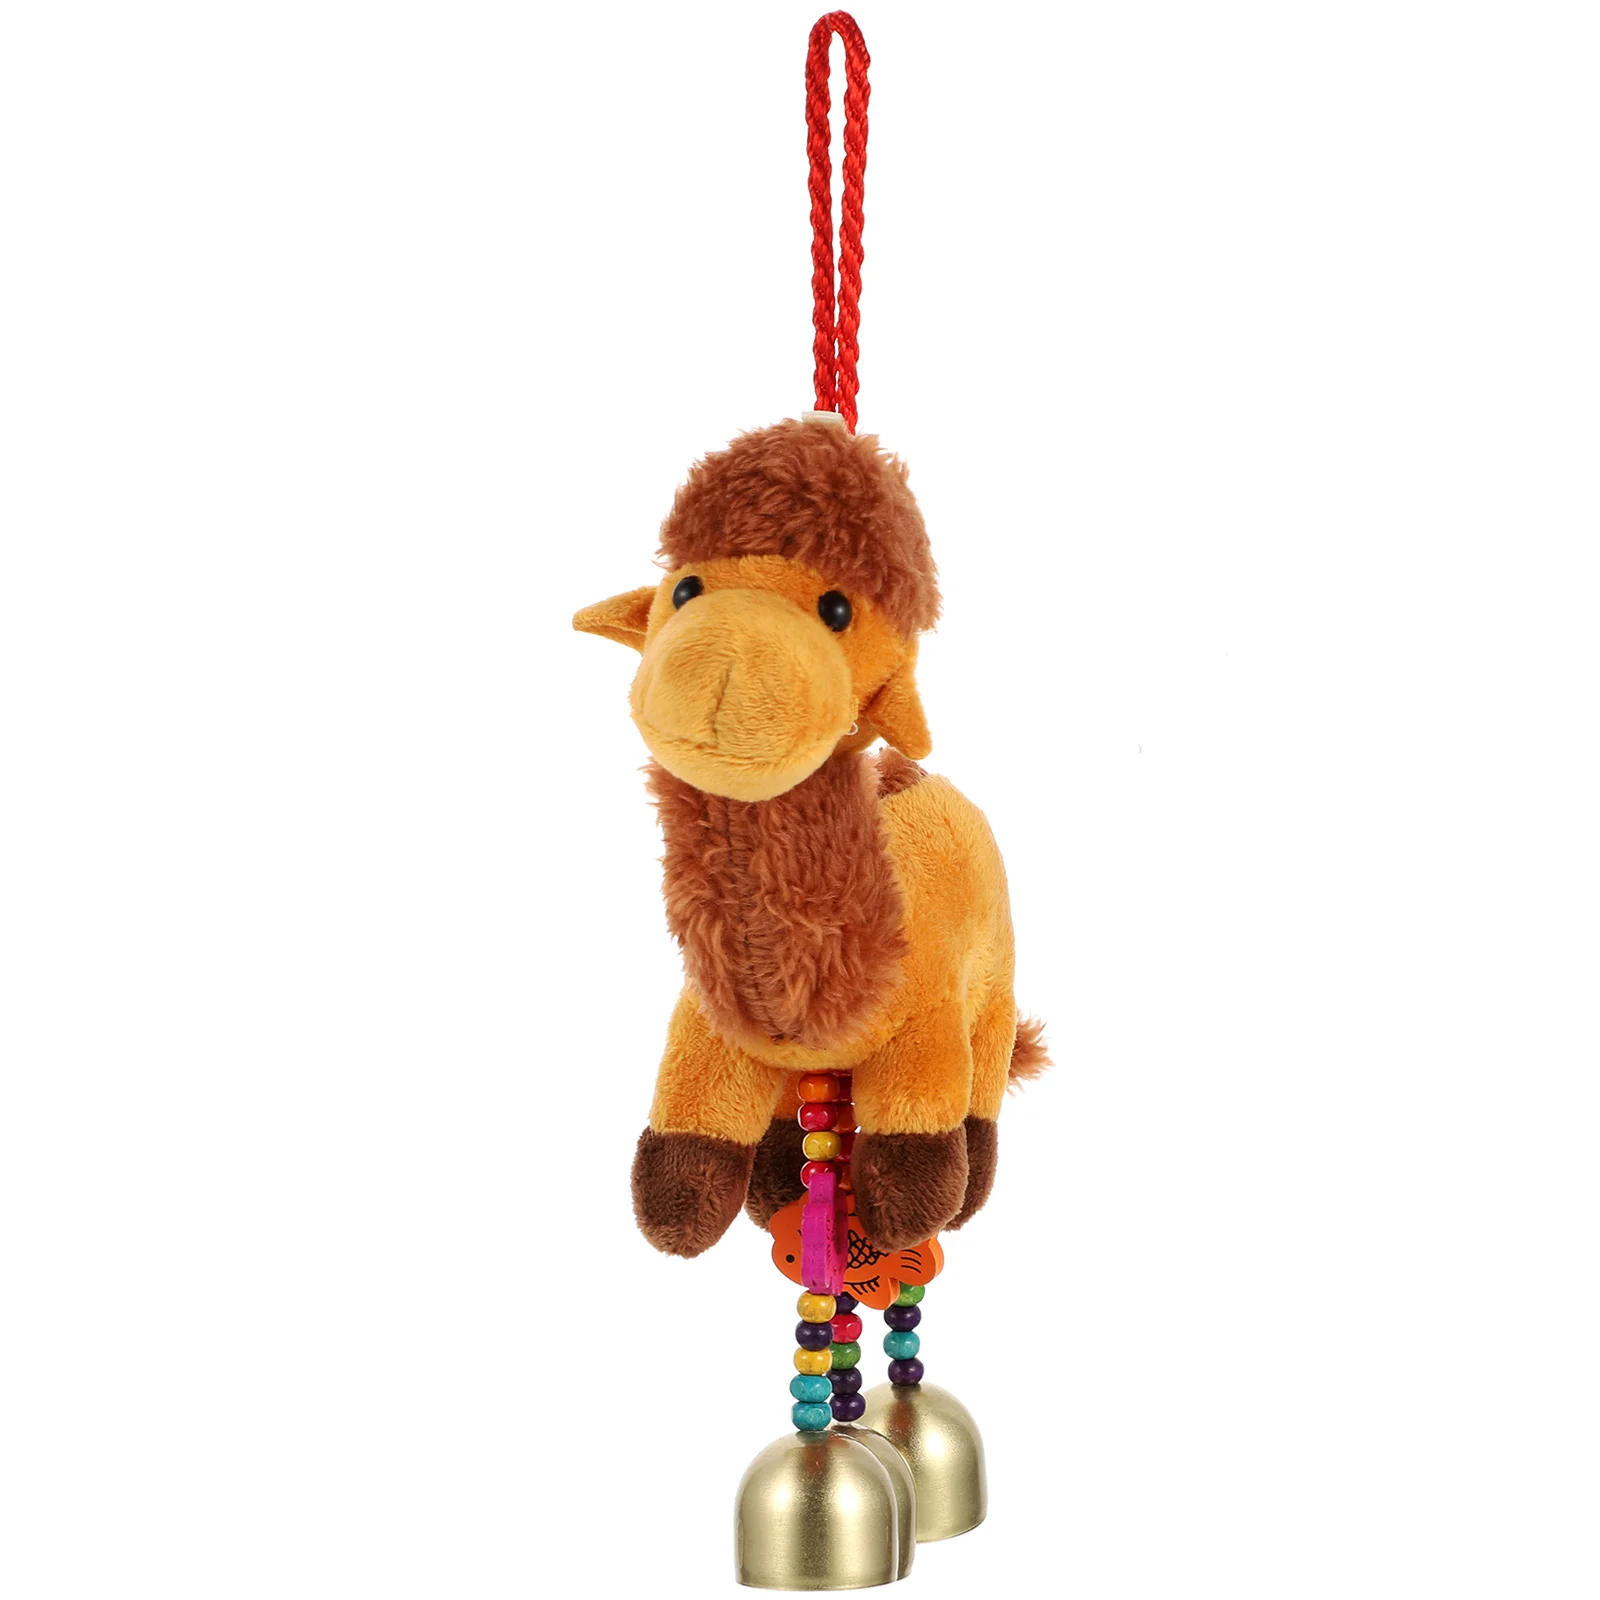 Camel Child Toys Keyring Bag Pendant Mini Kids Party Favors Metal Plush Keychains Aesthetic Childrens 24 pcs football keychains keyrings with soccer pendants party favors sport keychains carnival game reward gifts